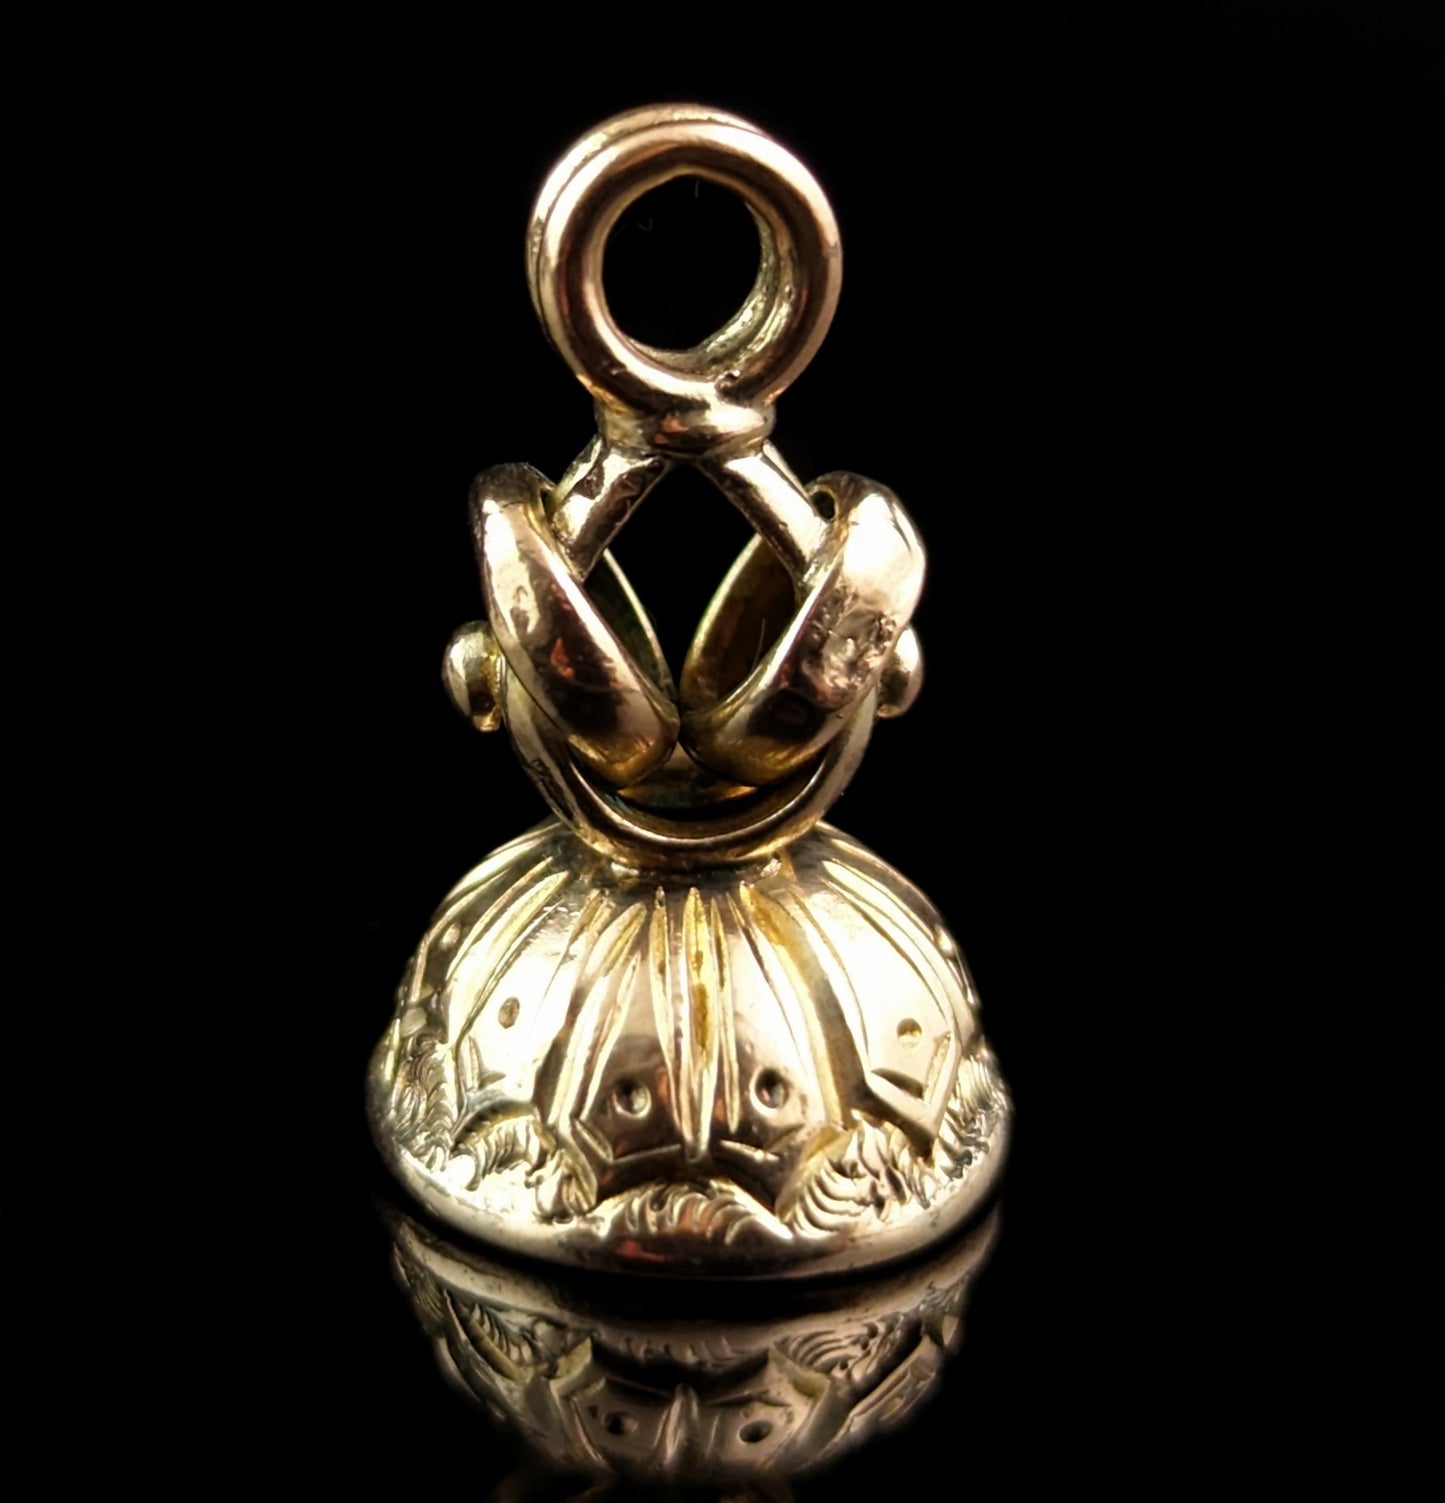 Antique Bloodstone seal fob pendant, 9ct gold cased, Victorian